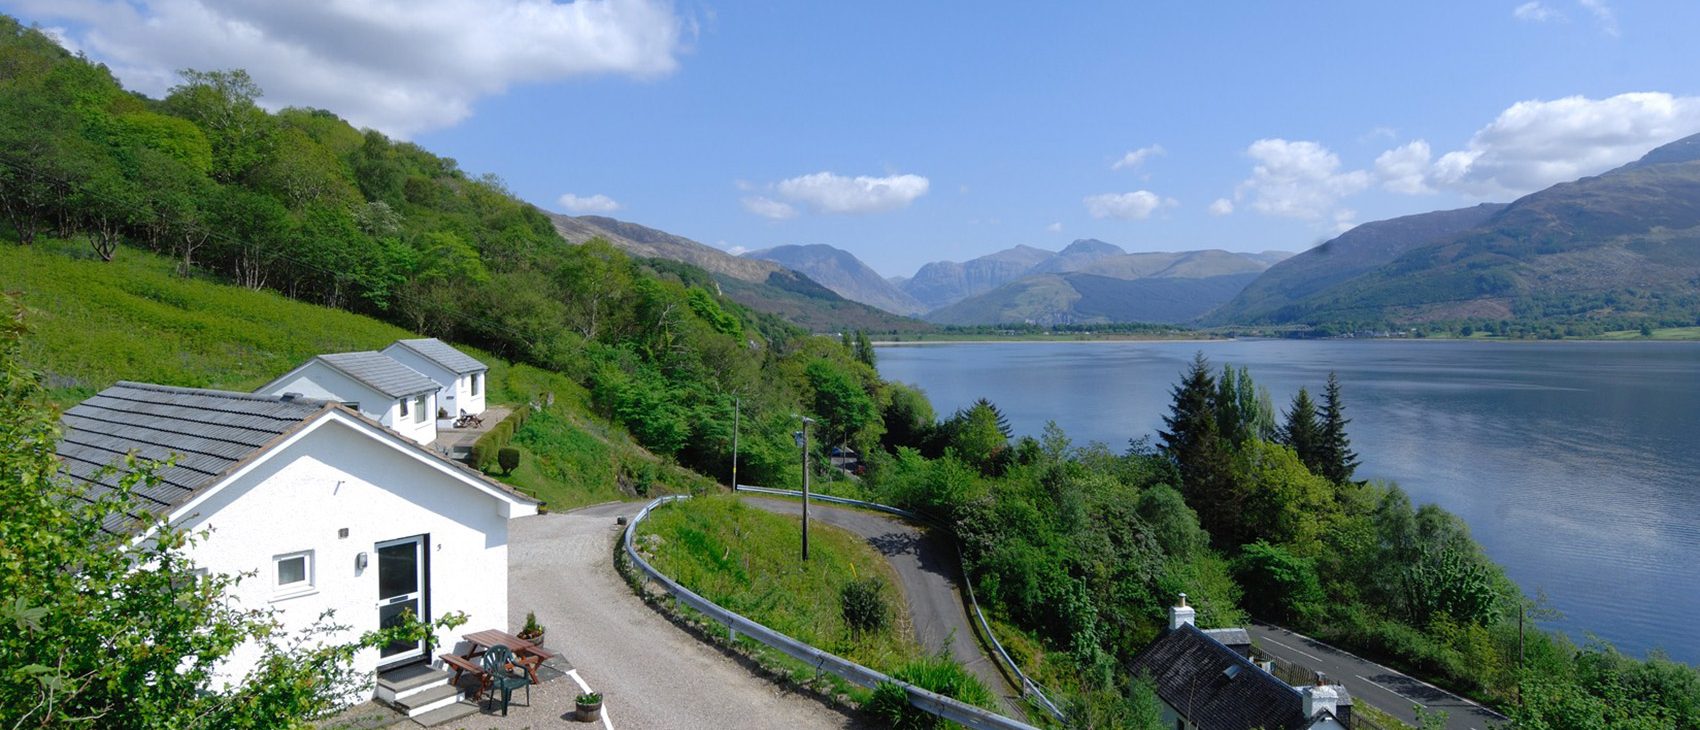 A selection of 3 and 4 star self catering<br />
Cottages in the Scottish Highlands<br />
set high above Loch Linnhe and Loch Leven <br />
with panoramic views<br />
